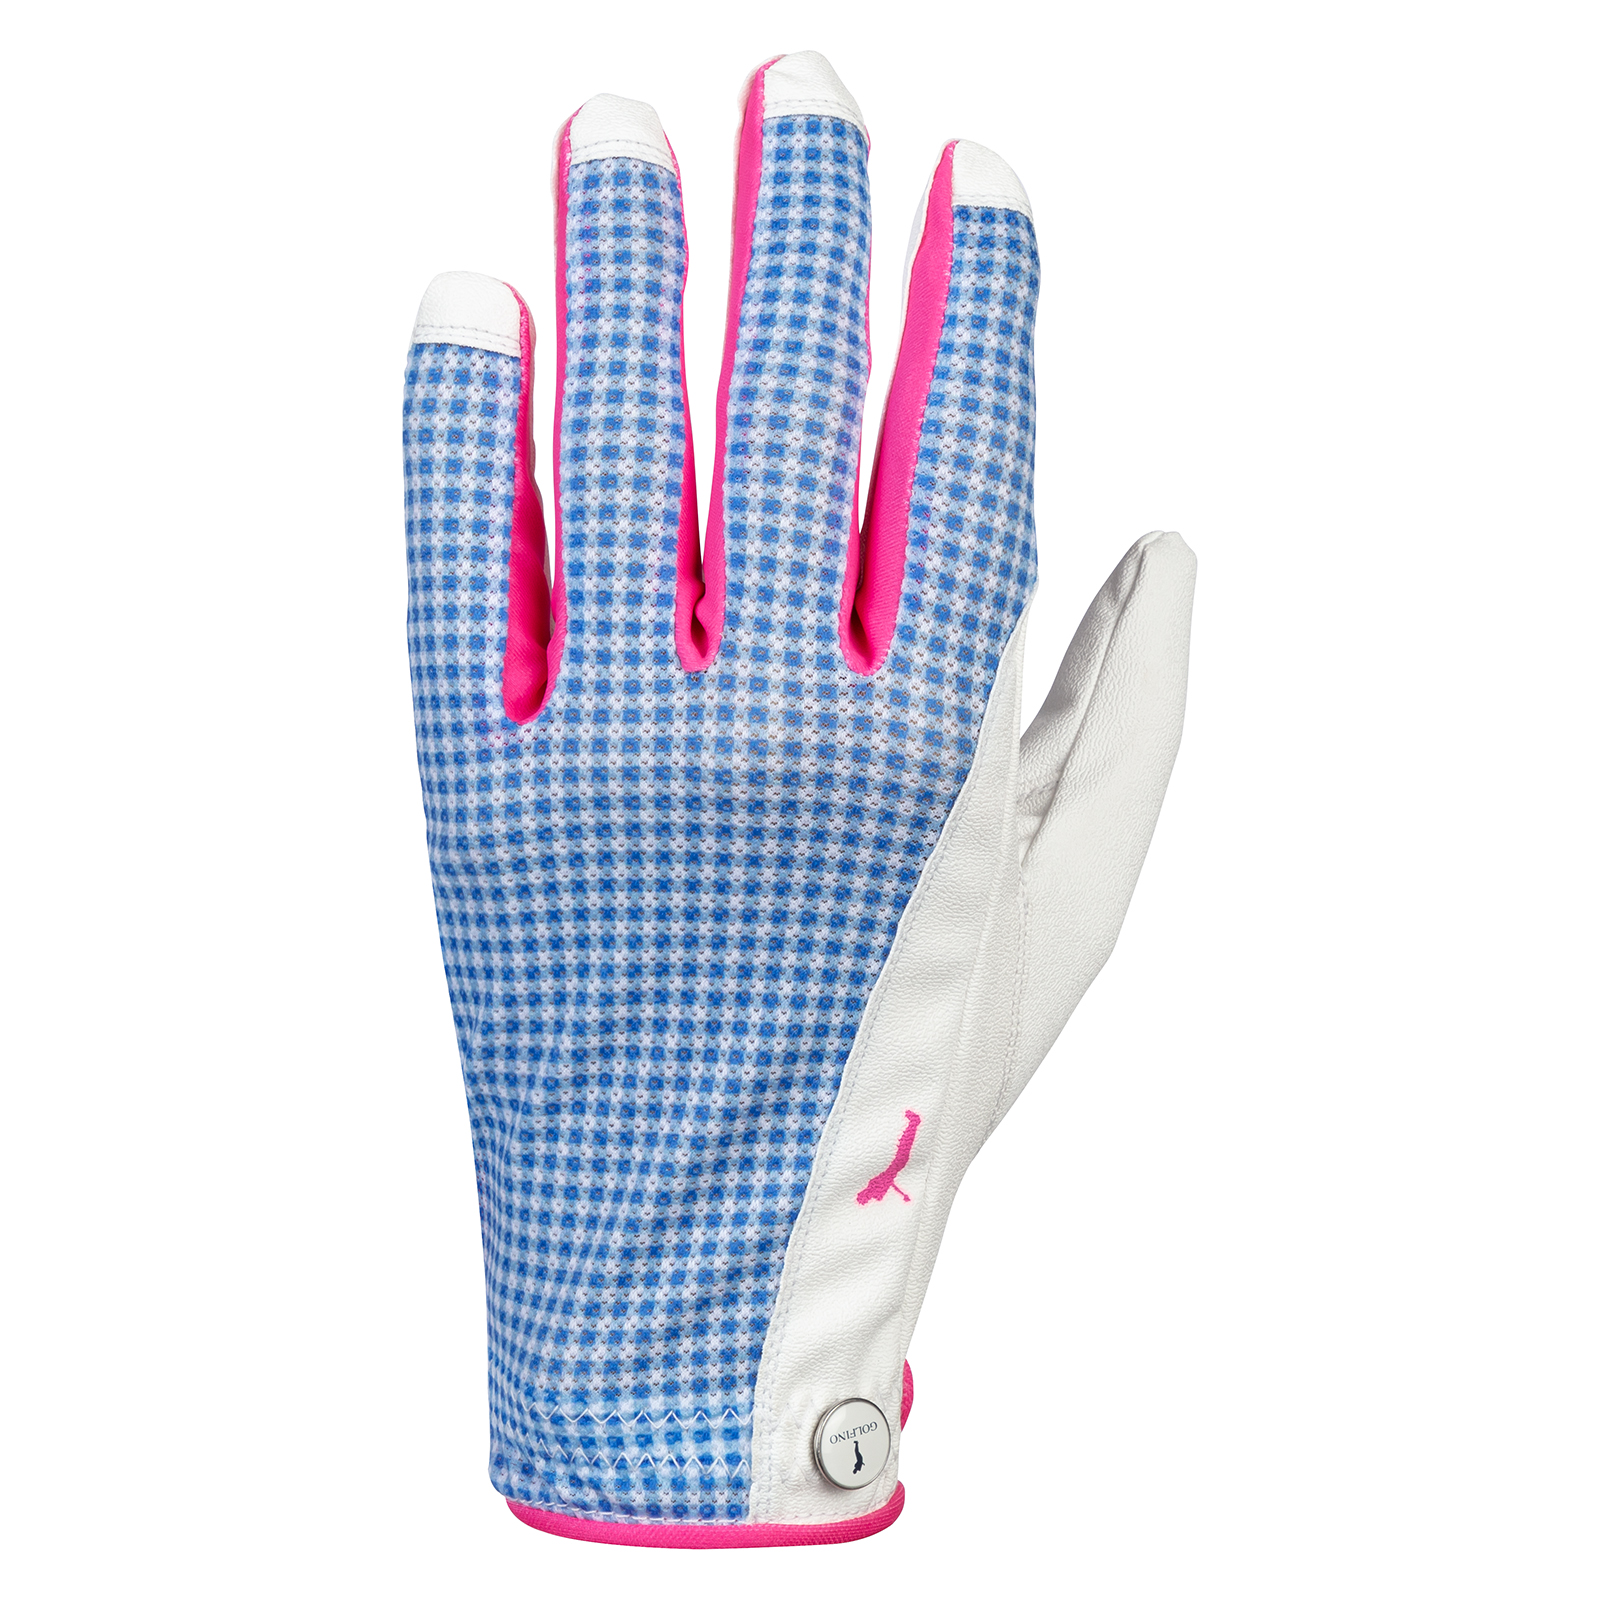 Ladies' left-hand golf glove made from vegan leather with Vichy check 